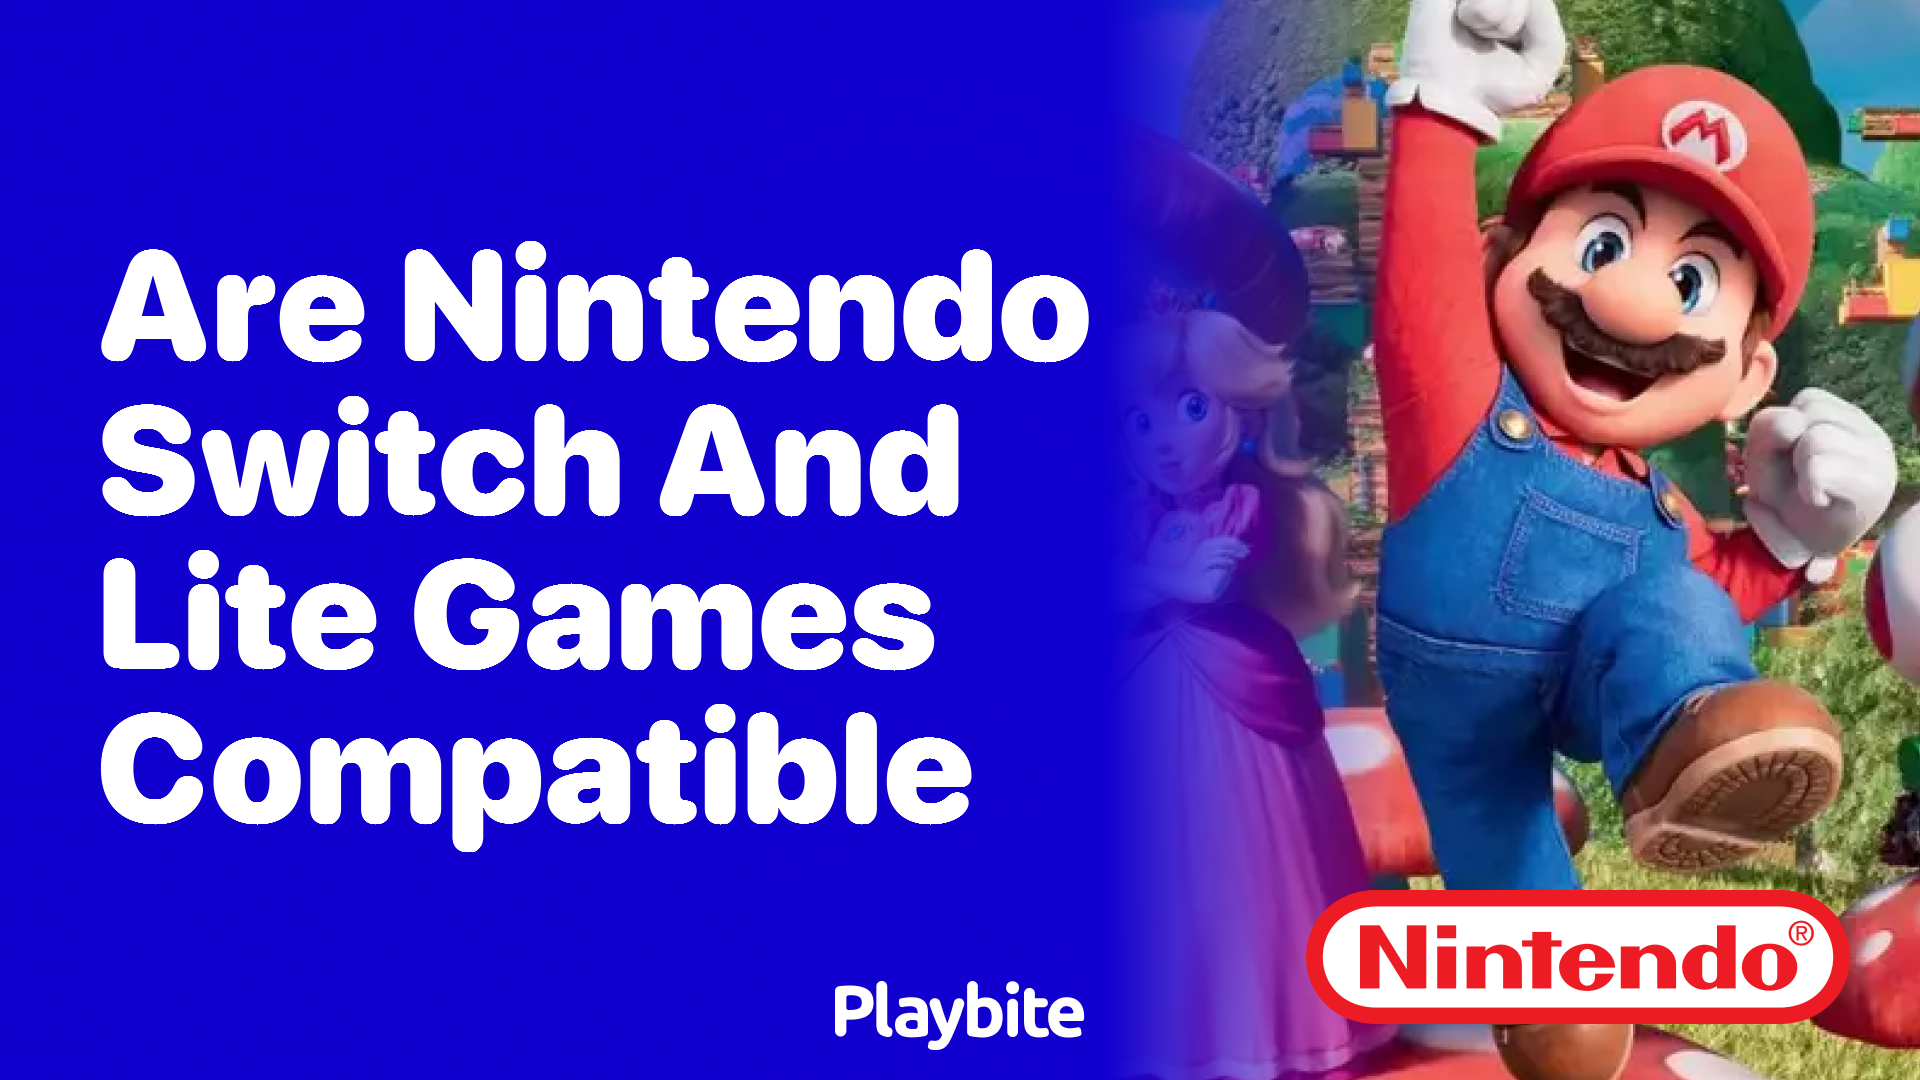 Are Nintendo Switch and Lite Games Compatible? Find Out Here! - Playbite